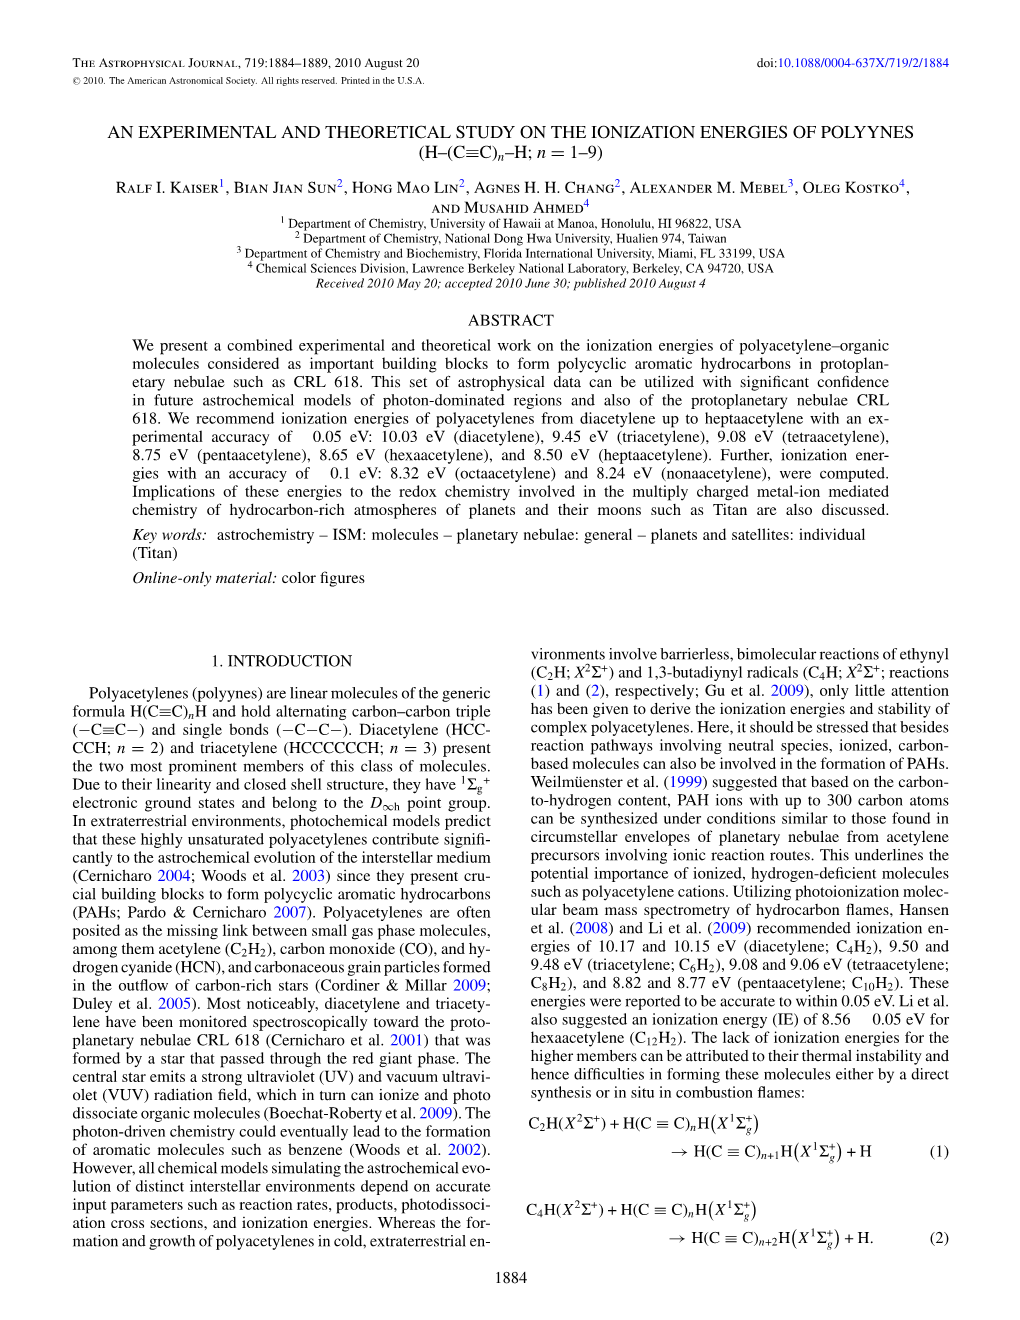 AN EXPERIMENTAL and THEORETICAL STUDY on the IONIZATION ENERGIES of POLYYNES (H–(C≡C)N–H; N = 1–9) Ralf I